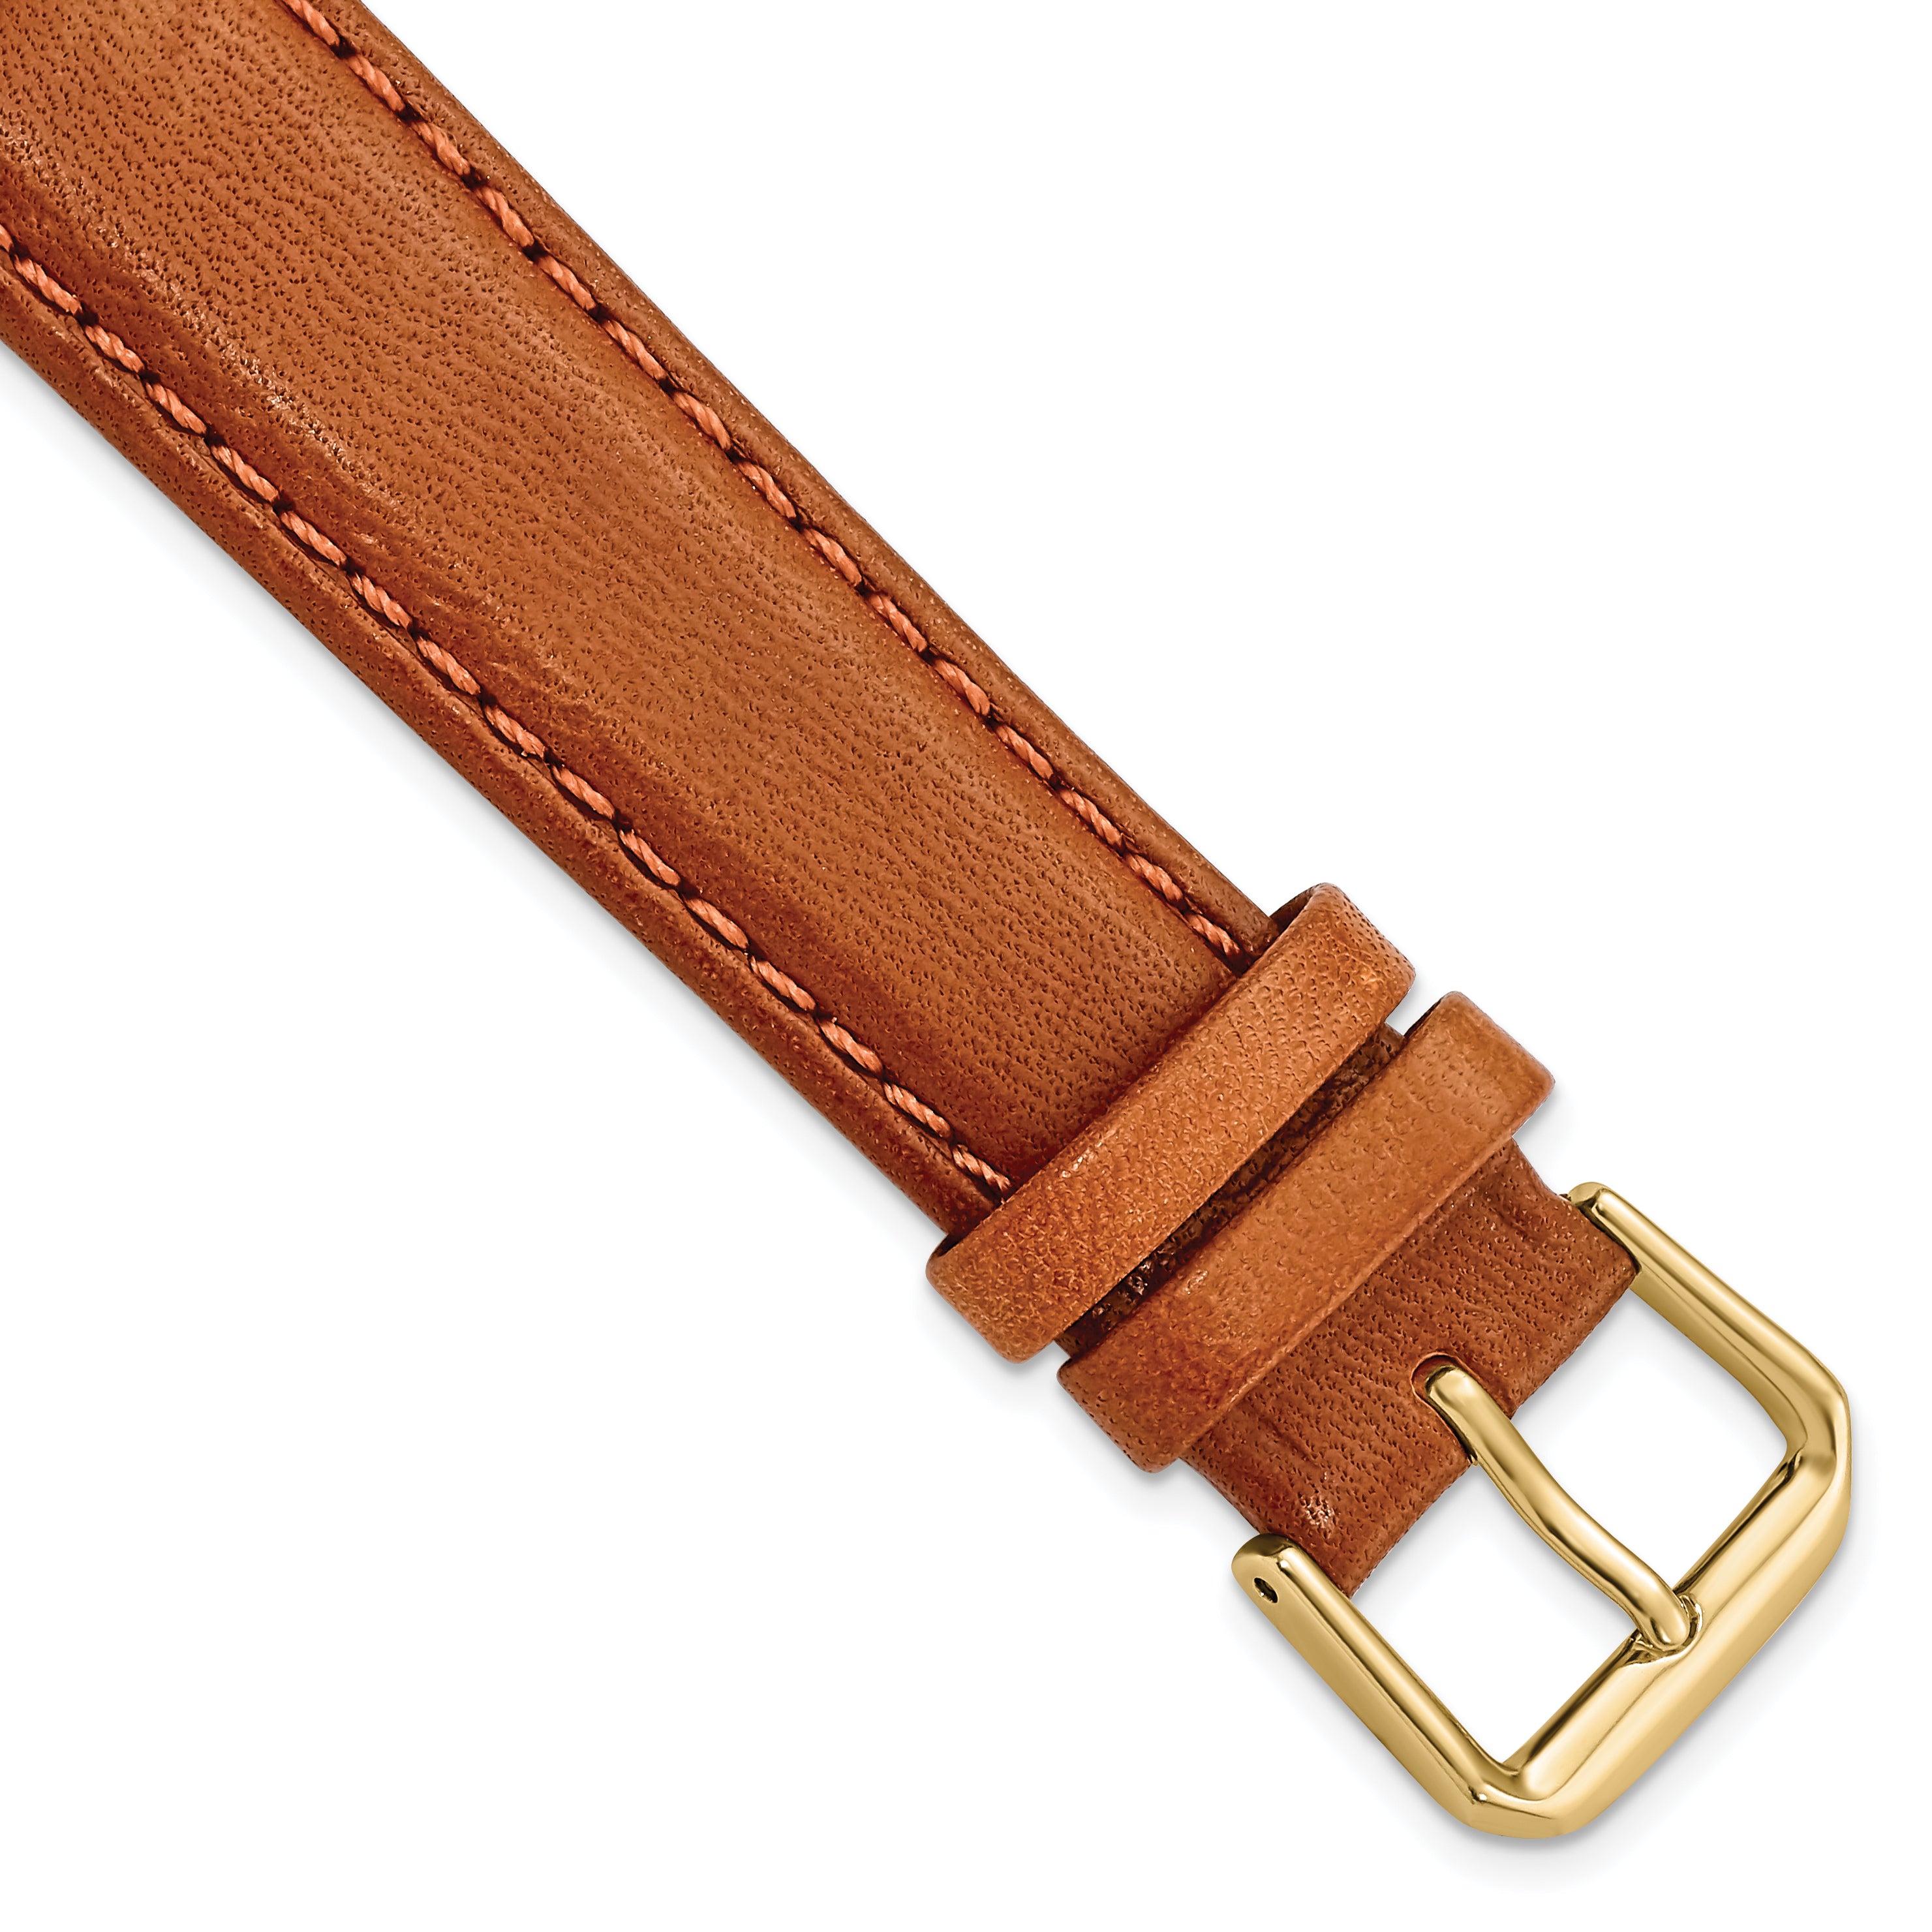 DeBeer 18mm Havana Italian Leather with Gold-tone Buckle 7.5 inch Watch Band